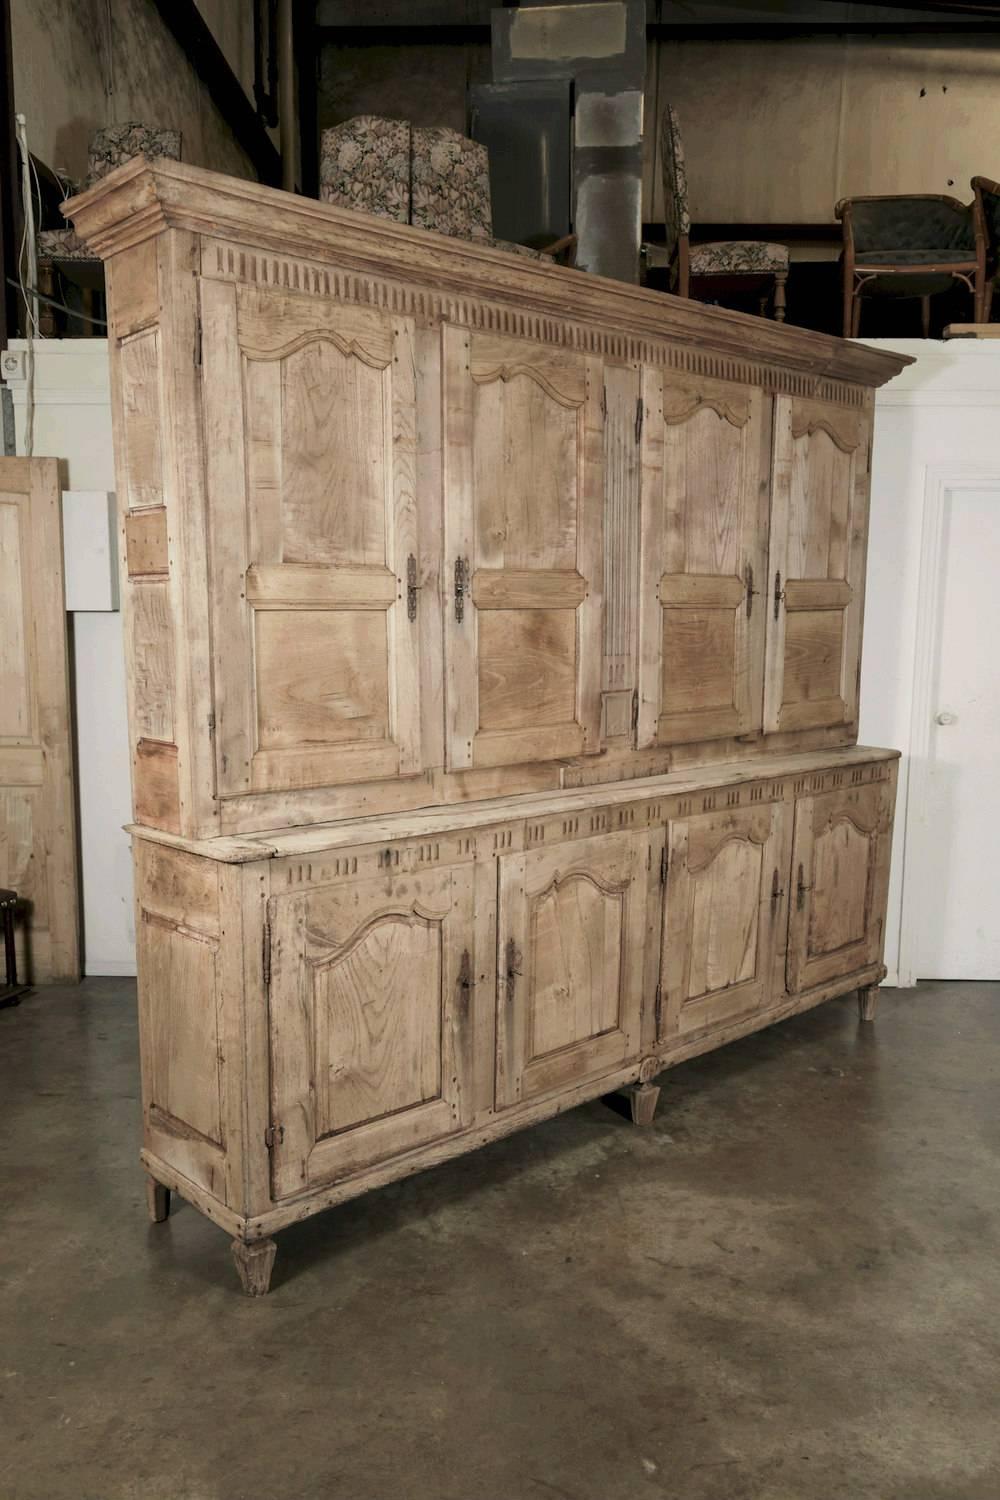 A monumental 18th century bleached walnut chateau buffet deux corps, handcrafted by talented artisans from Aix en Provence during the French Transition period (1750-1775). Most Transition period pieces were created outside Paris by provincial